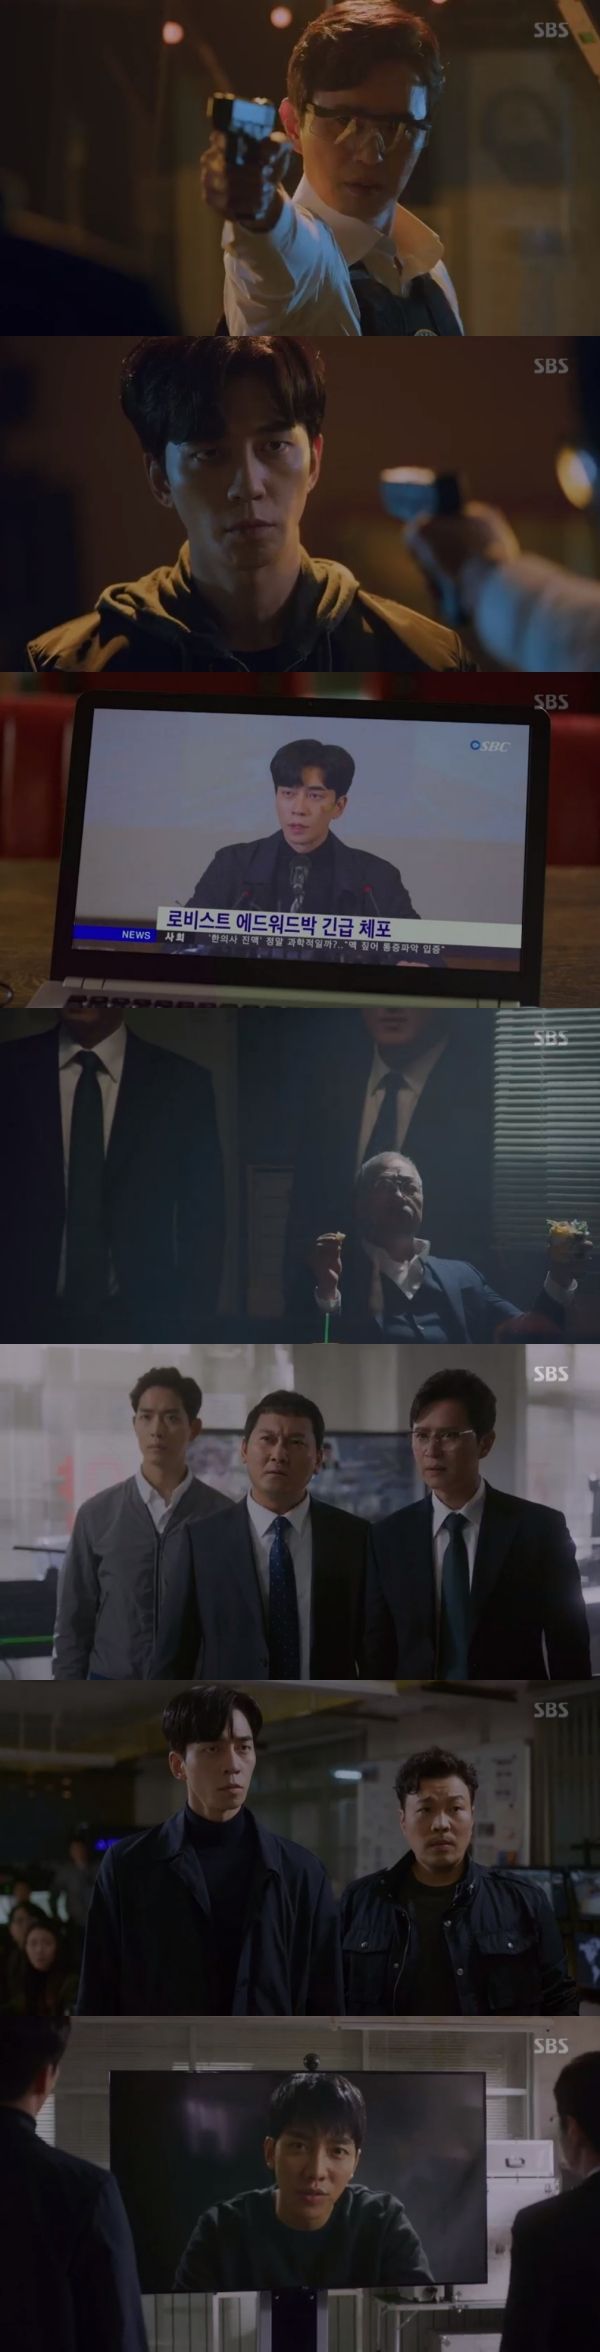 An angry Lee Seung-gi has signaled revenge.In the 10th episode of SBSs gilt drama Vagabond (playplayed by Jang Young-chul, directed by Yoo In-sik), which was broadcast on the 19th, Cha Dal-geon (Lee Seung-gi), who was threatened with murder, predicted revenge toward the NIS.On the same day, Gohari (basin), Kitaewoong (Shin Seong-rok), and Cha Dal-gun, who evacuated to the Moroccan Embassy, protected Kim if and waited for the support team.But the support team tried to Assassination Kim if and Cha Dal-geon, and Ko Hae-ri and Kitaewoong blocked the support team against the order.The support team breathed in front of the gun that Gitaewoong aimed at, saying it was a traitor.You are the only one who will take on a serious mission, Gitaewoong said in a statement, saying, Ahn is the director.In addition, Gitaewoong said, We did not kill him. He instructed the team member to  erase CCTV.Min Jae-sik (Jung Man-sik) headed for Kang Ju-cheol (Lee Ki-young) after Kim if and Cha Dal-gun Assassination failed; he ordered him to kill Kang Ju-cheol by putting medicine in his meal.In addition, Min Jae-sik, who headed to the airport, embraced Kitaoong.Meanwhile, Prince Edward Island Park told Chadalgan before his arrest: The government is involved - get your hands off me.Kim if will be put in court directly by my hand. Kim if, Kim if, and Cha Dal-gun, who hid his breath, hacked the NIS and foreshadowed revenge.